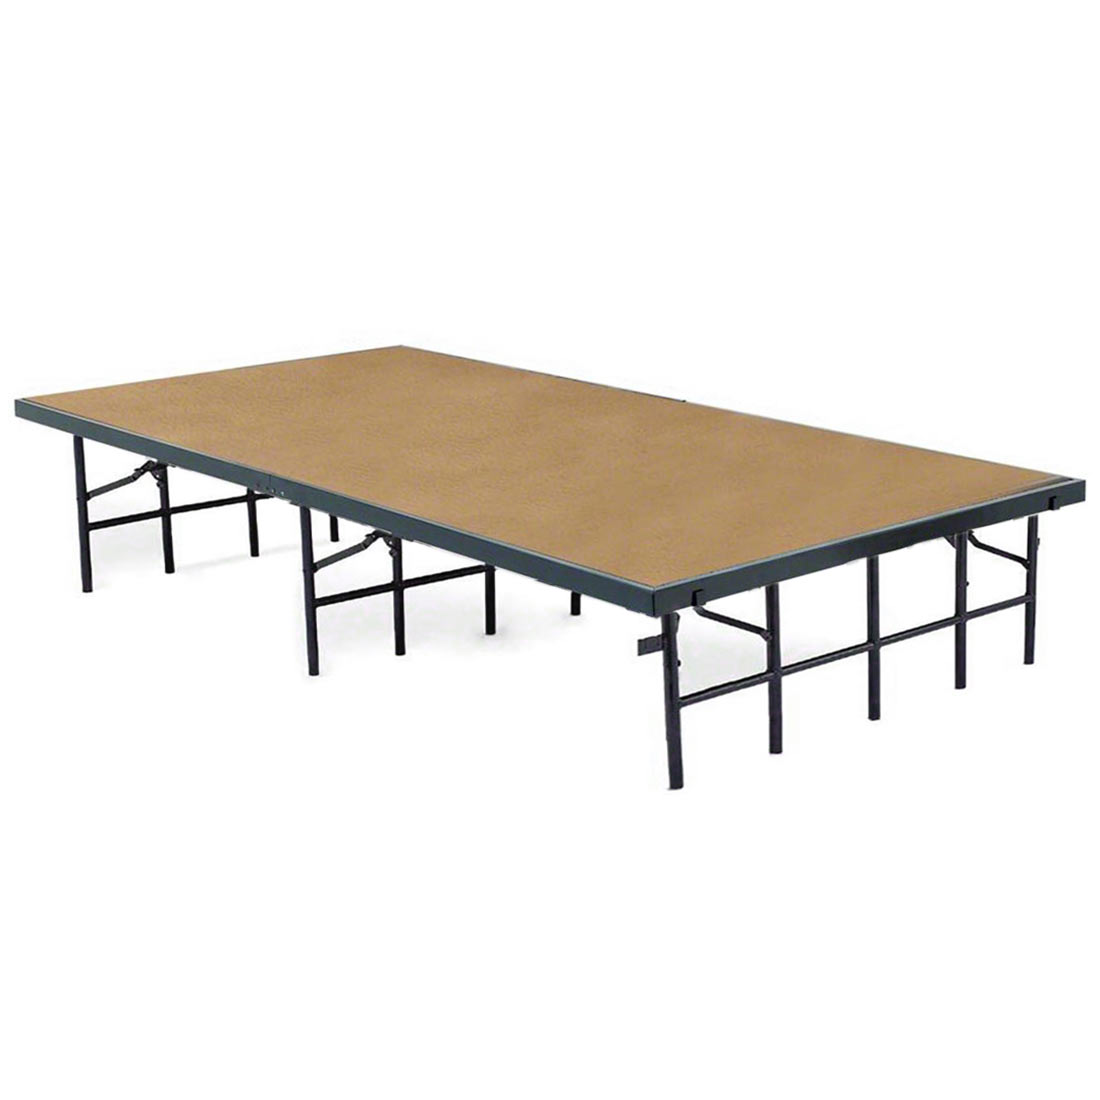 National Public Seating S3616HB Portable Stage with Hardboard - 96L x 36W x 16H